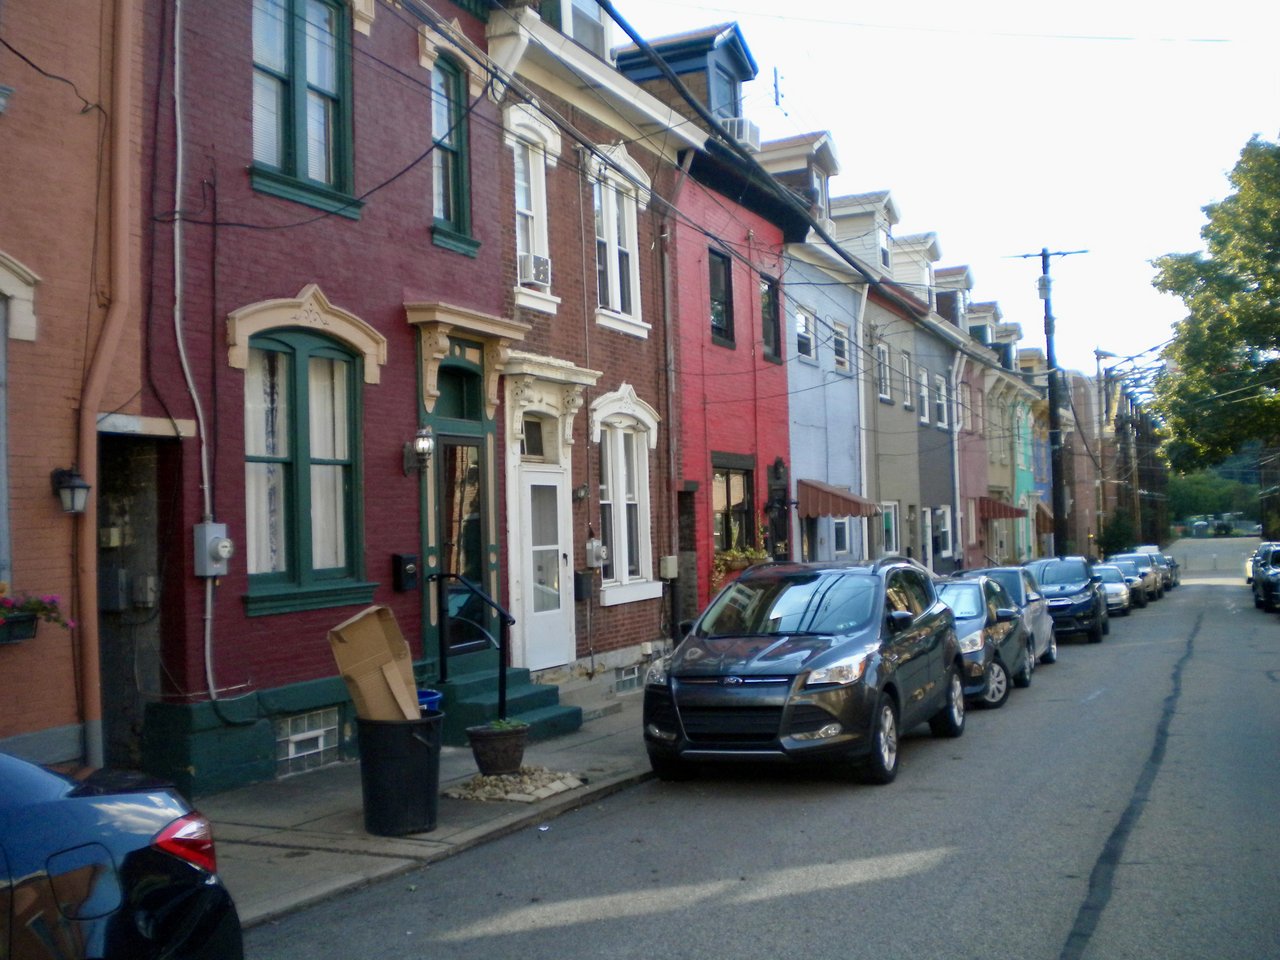 Row houses in Lawrenceville